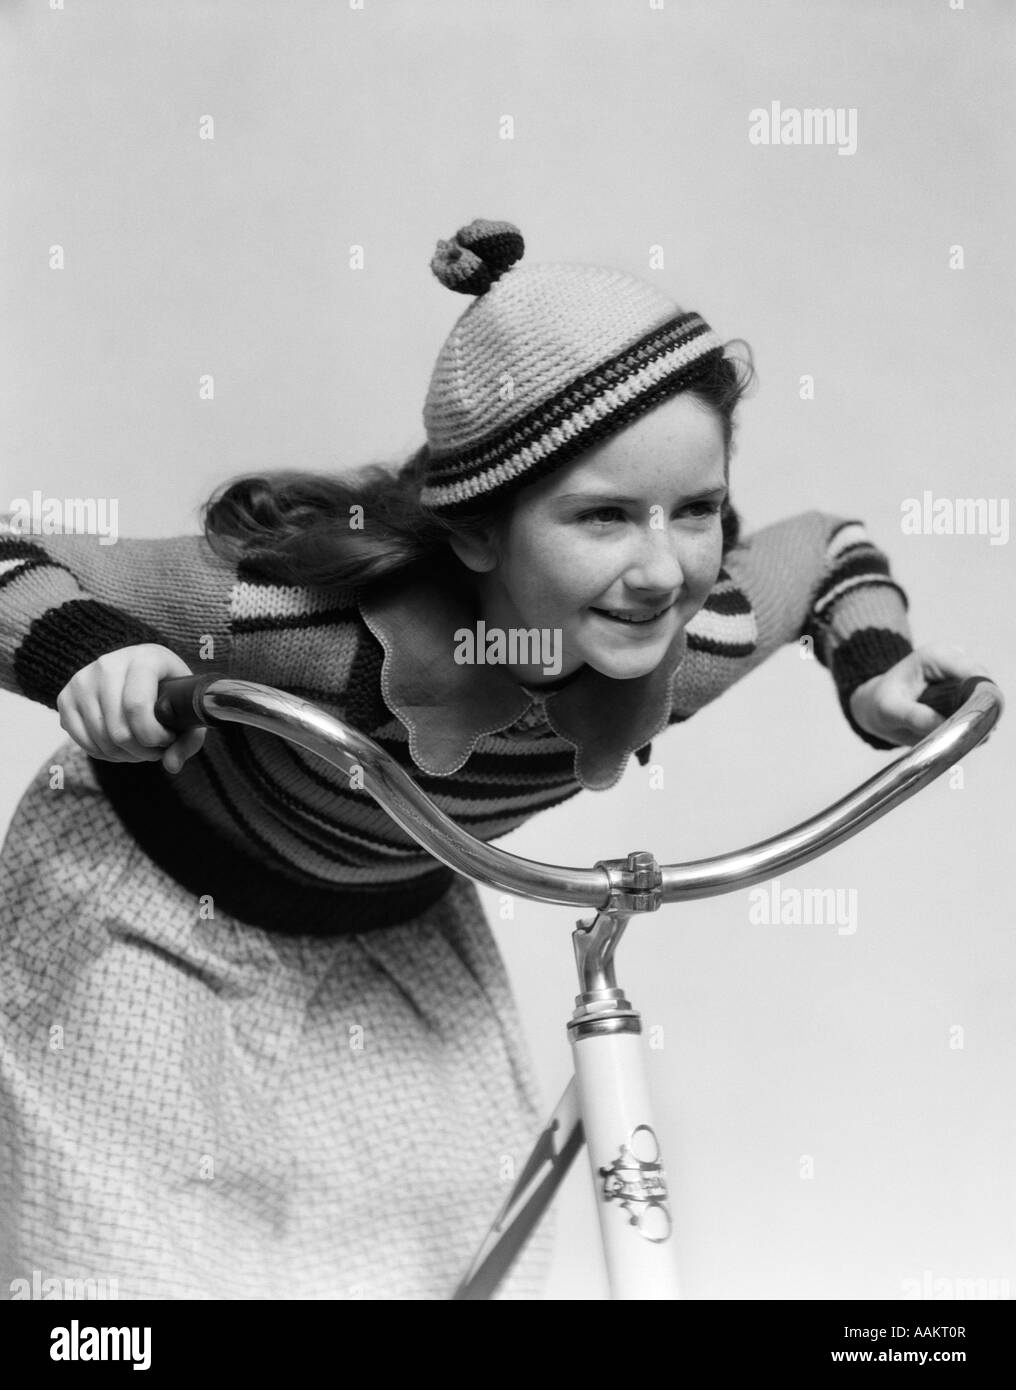 1930s SMILING EAGER LITTLE GIRL IN KNIT CAP AND MATCHING SWEATER RIDING BIKE LEANING INTO HANDLEBARS Stock Photo